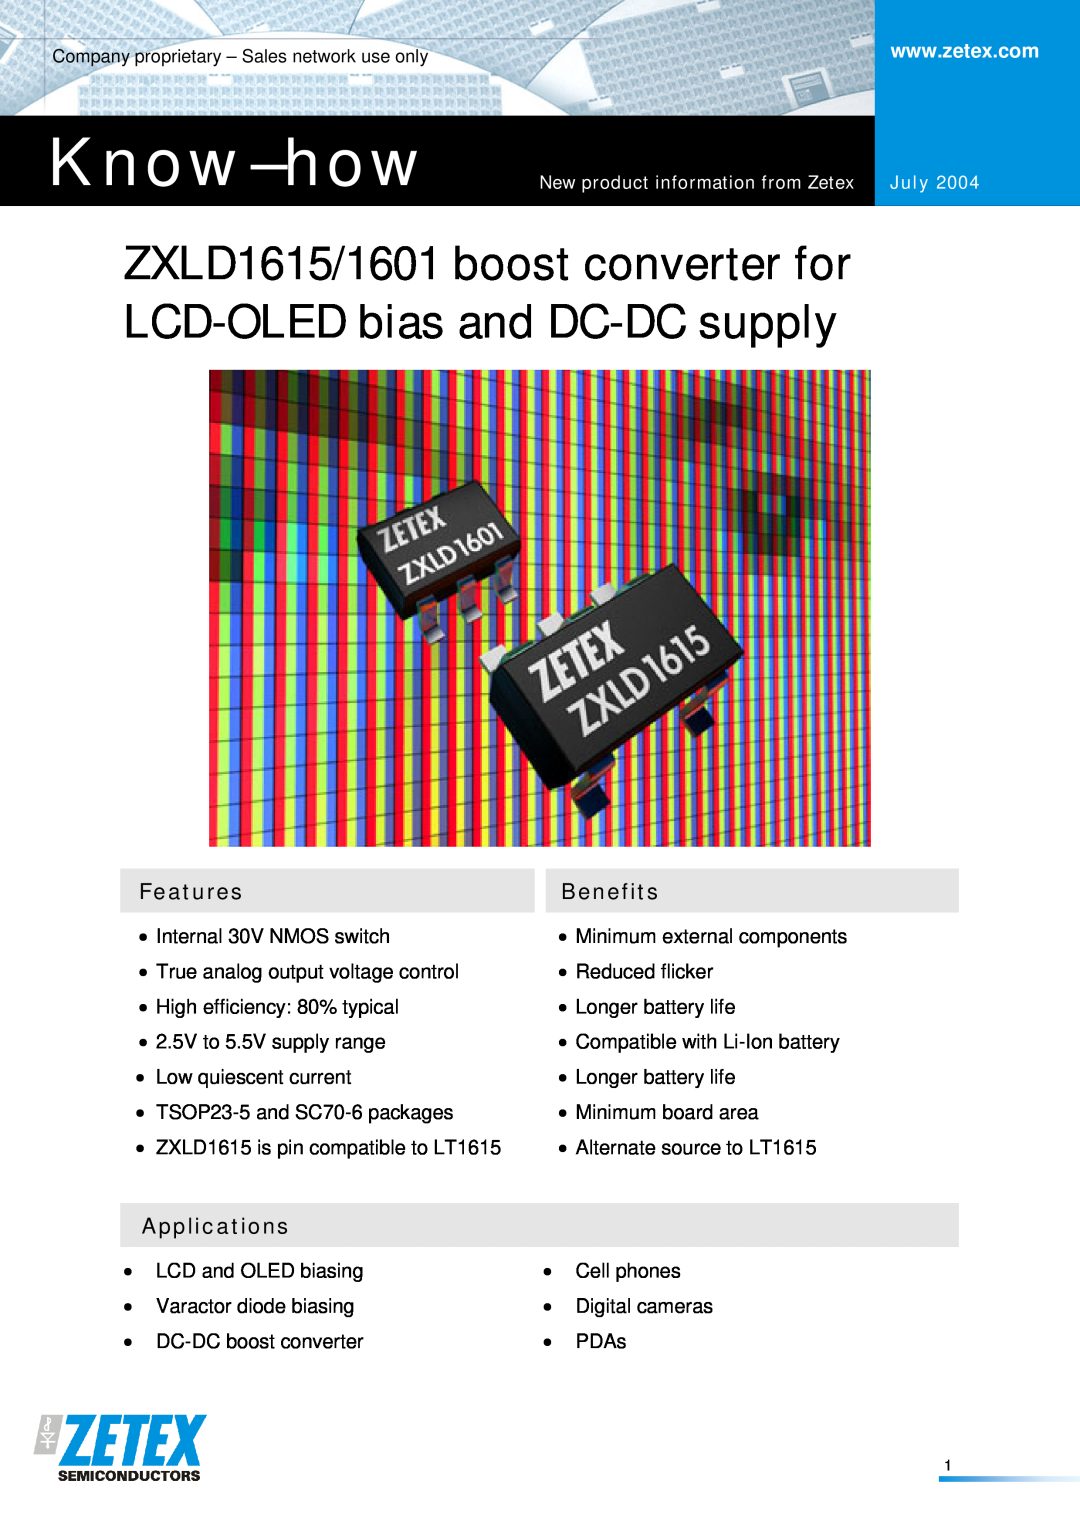 Zetex Semiconductors PLC ZXLD1615/1601 manual Features, Benefits, Applications, New product information from Zetex, July 